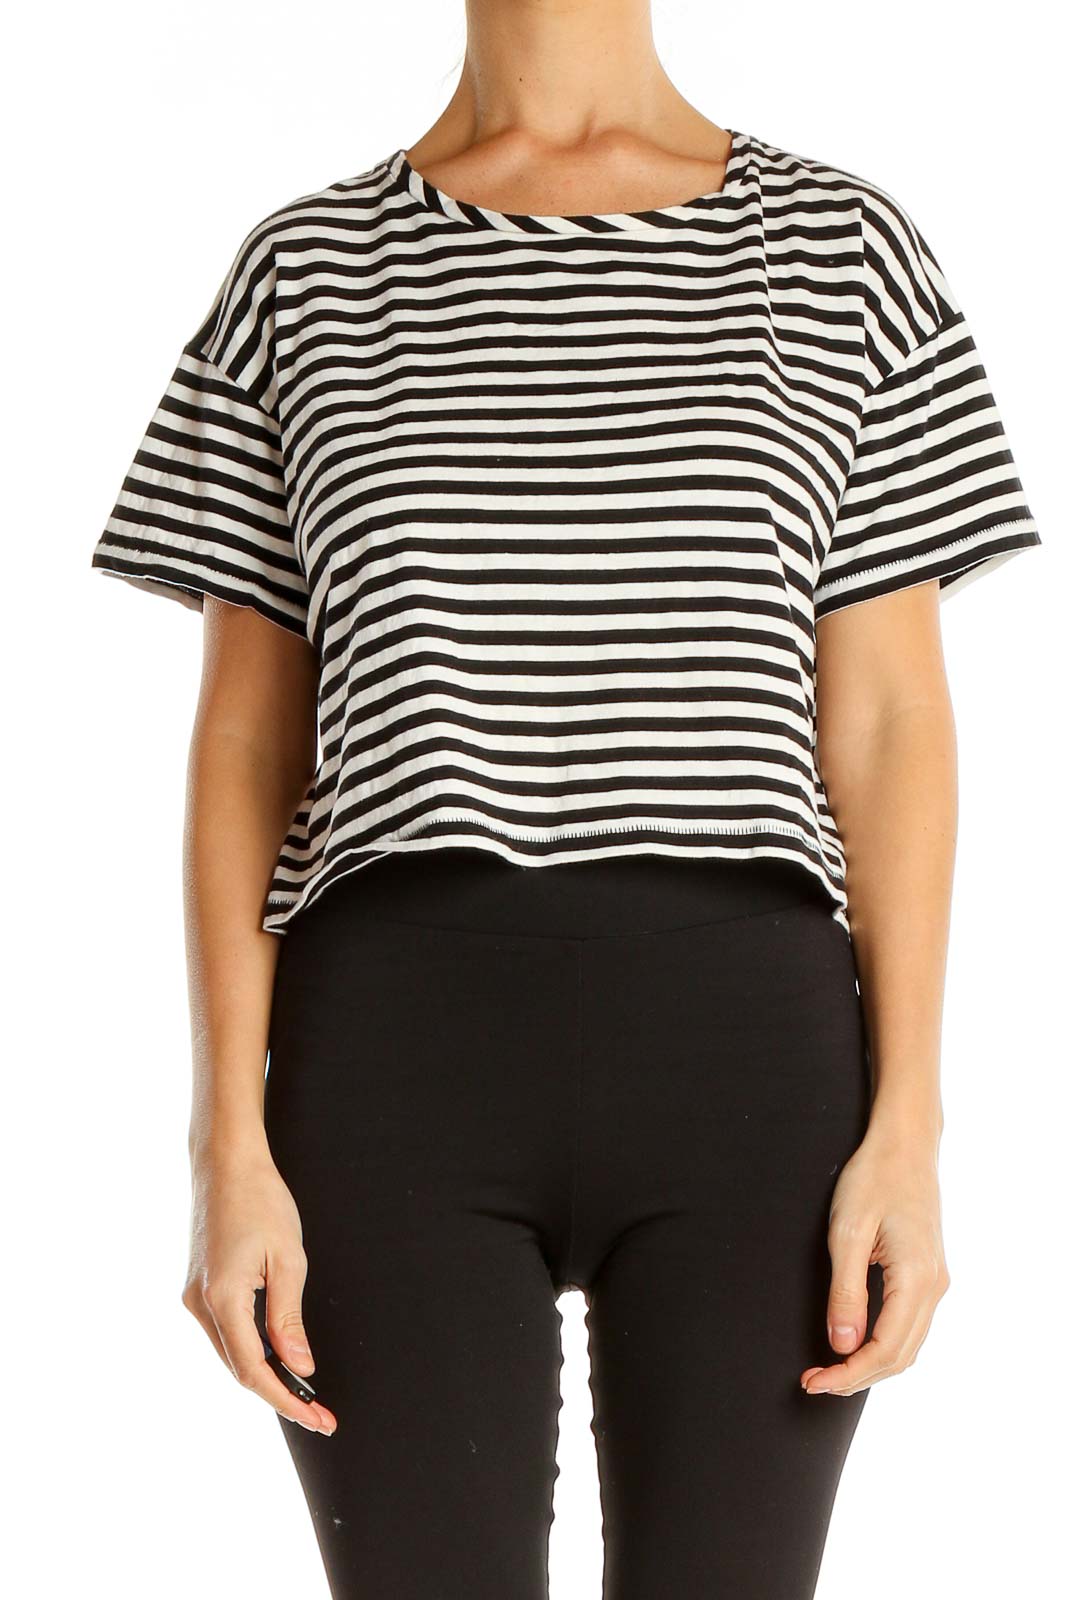 Black White Striped Casual T-Shirt Front